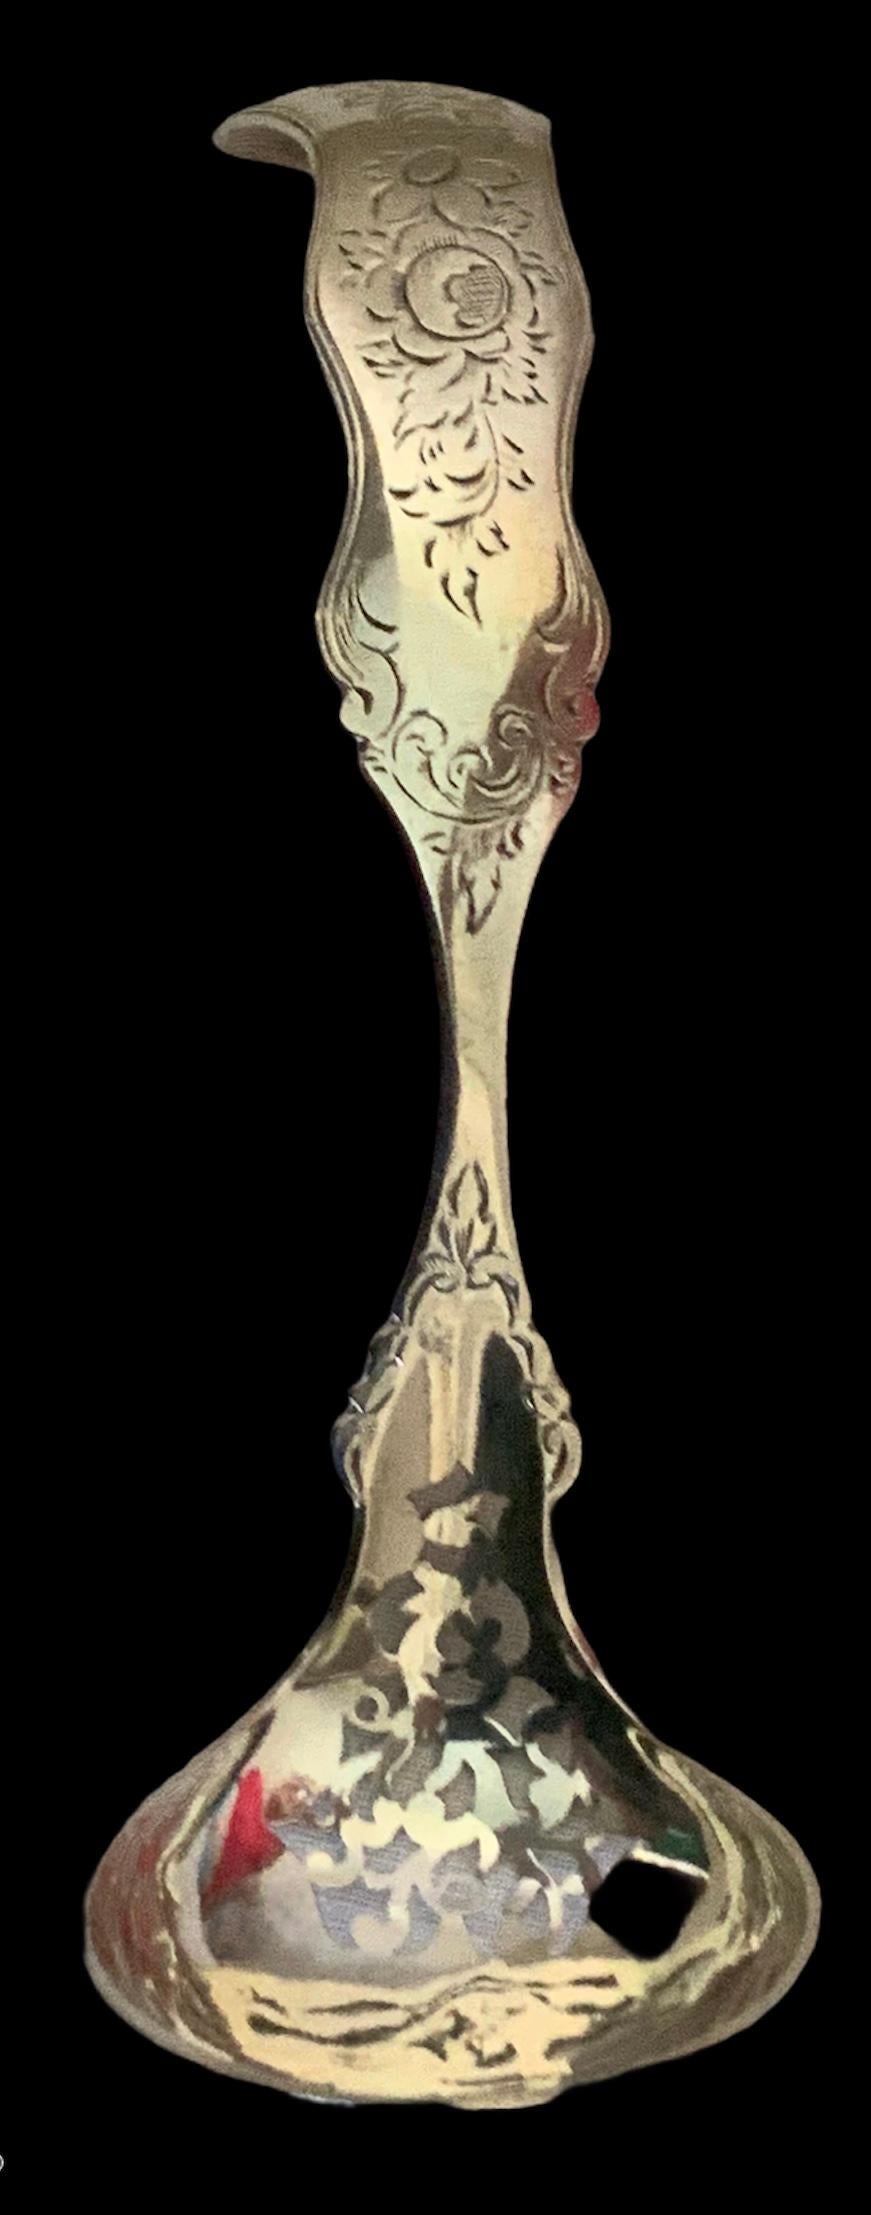 This is a Dutch Silver gravy or sauce small ladle/sifter spoon. It is engraved with a bouquet of flowers and leaves in the handle. It is adorned with some engraved birds in the lateral sides of the handle and some scrolls in the lower part. It is